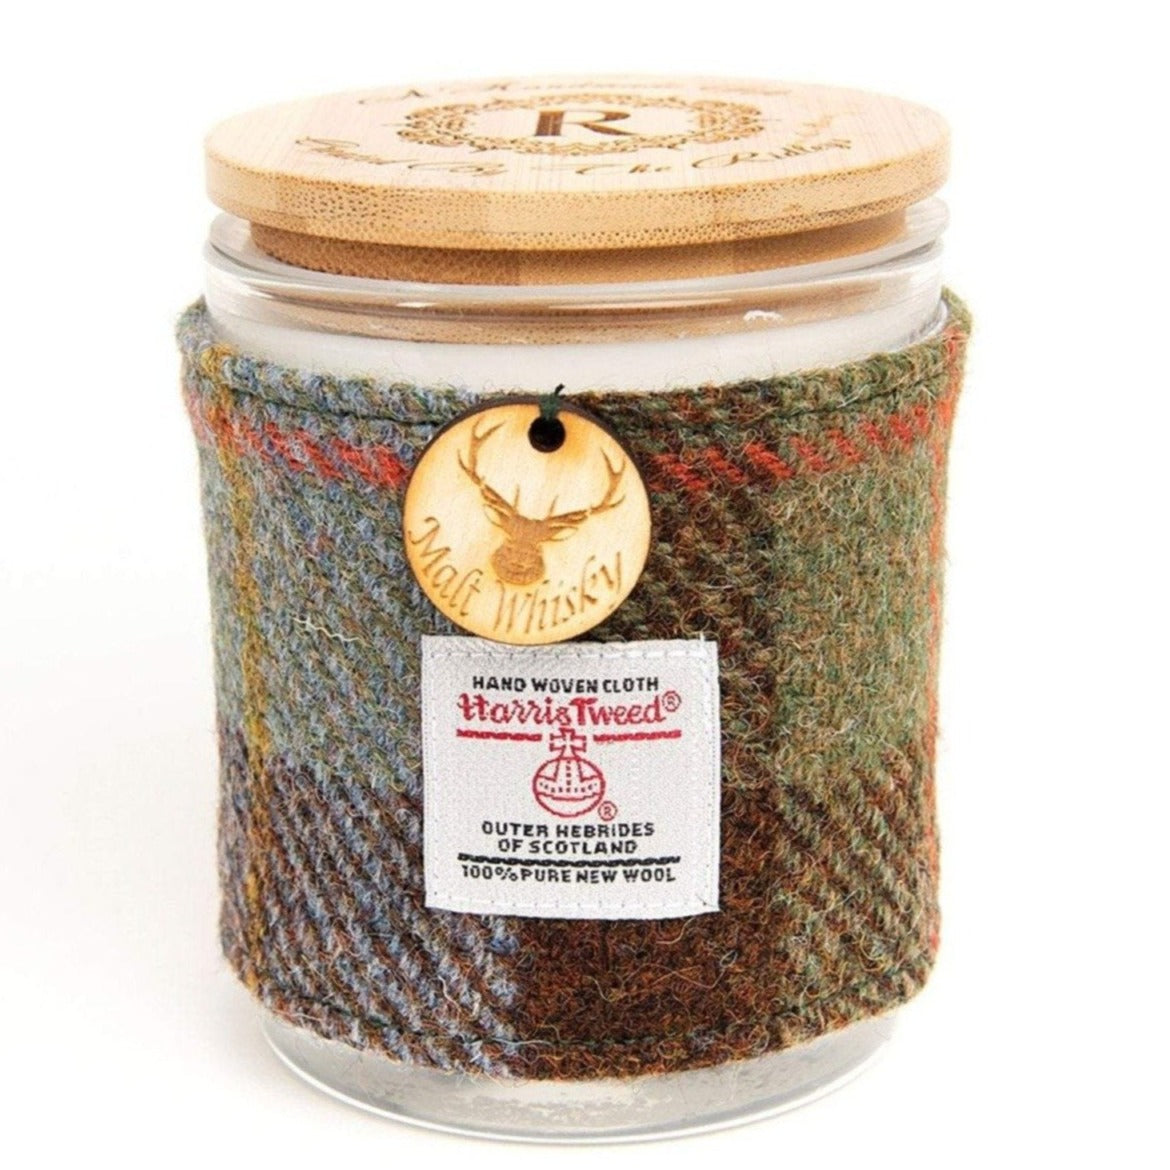 Malt Whisky Scented Soy Candle with Harris Tweed Sleeve